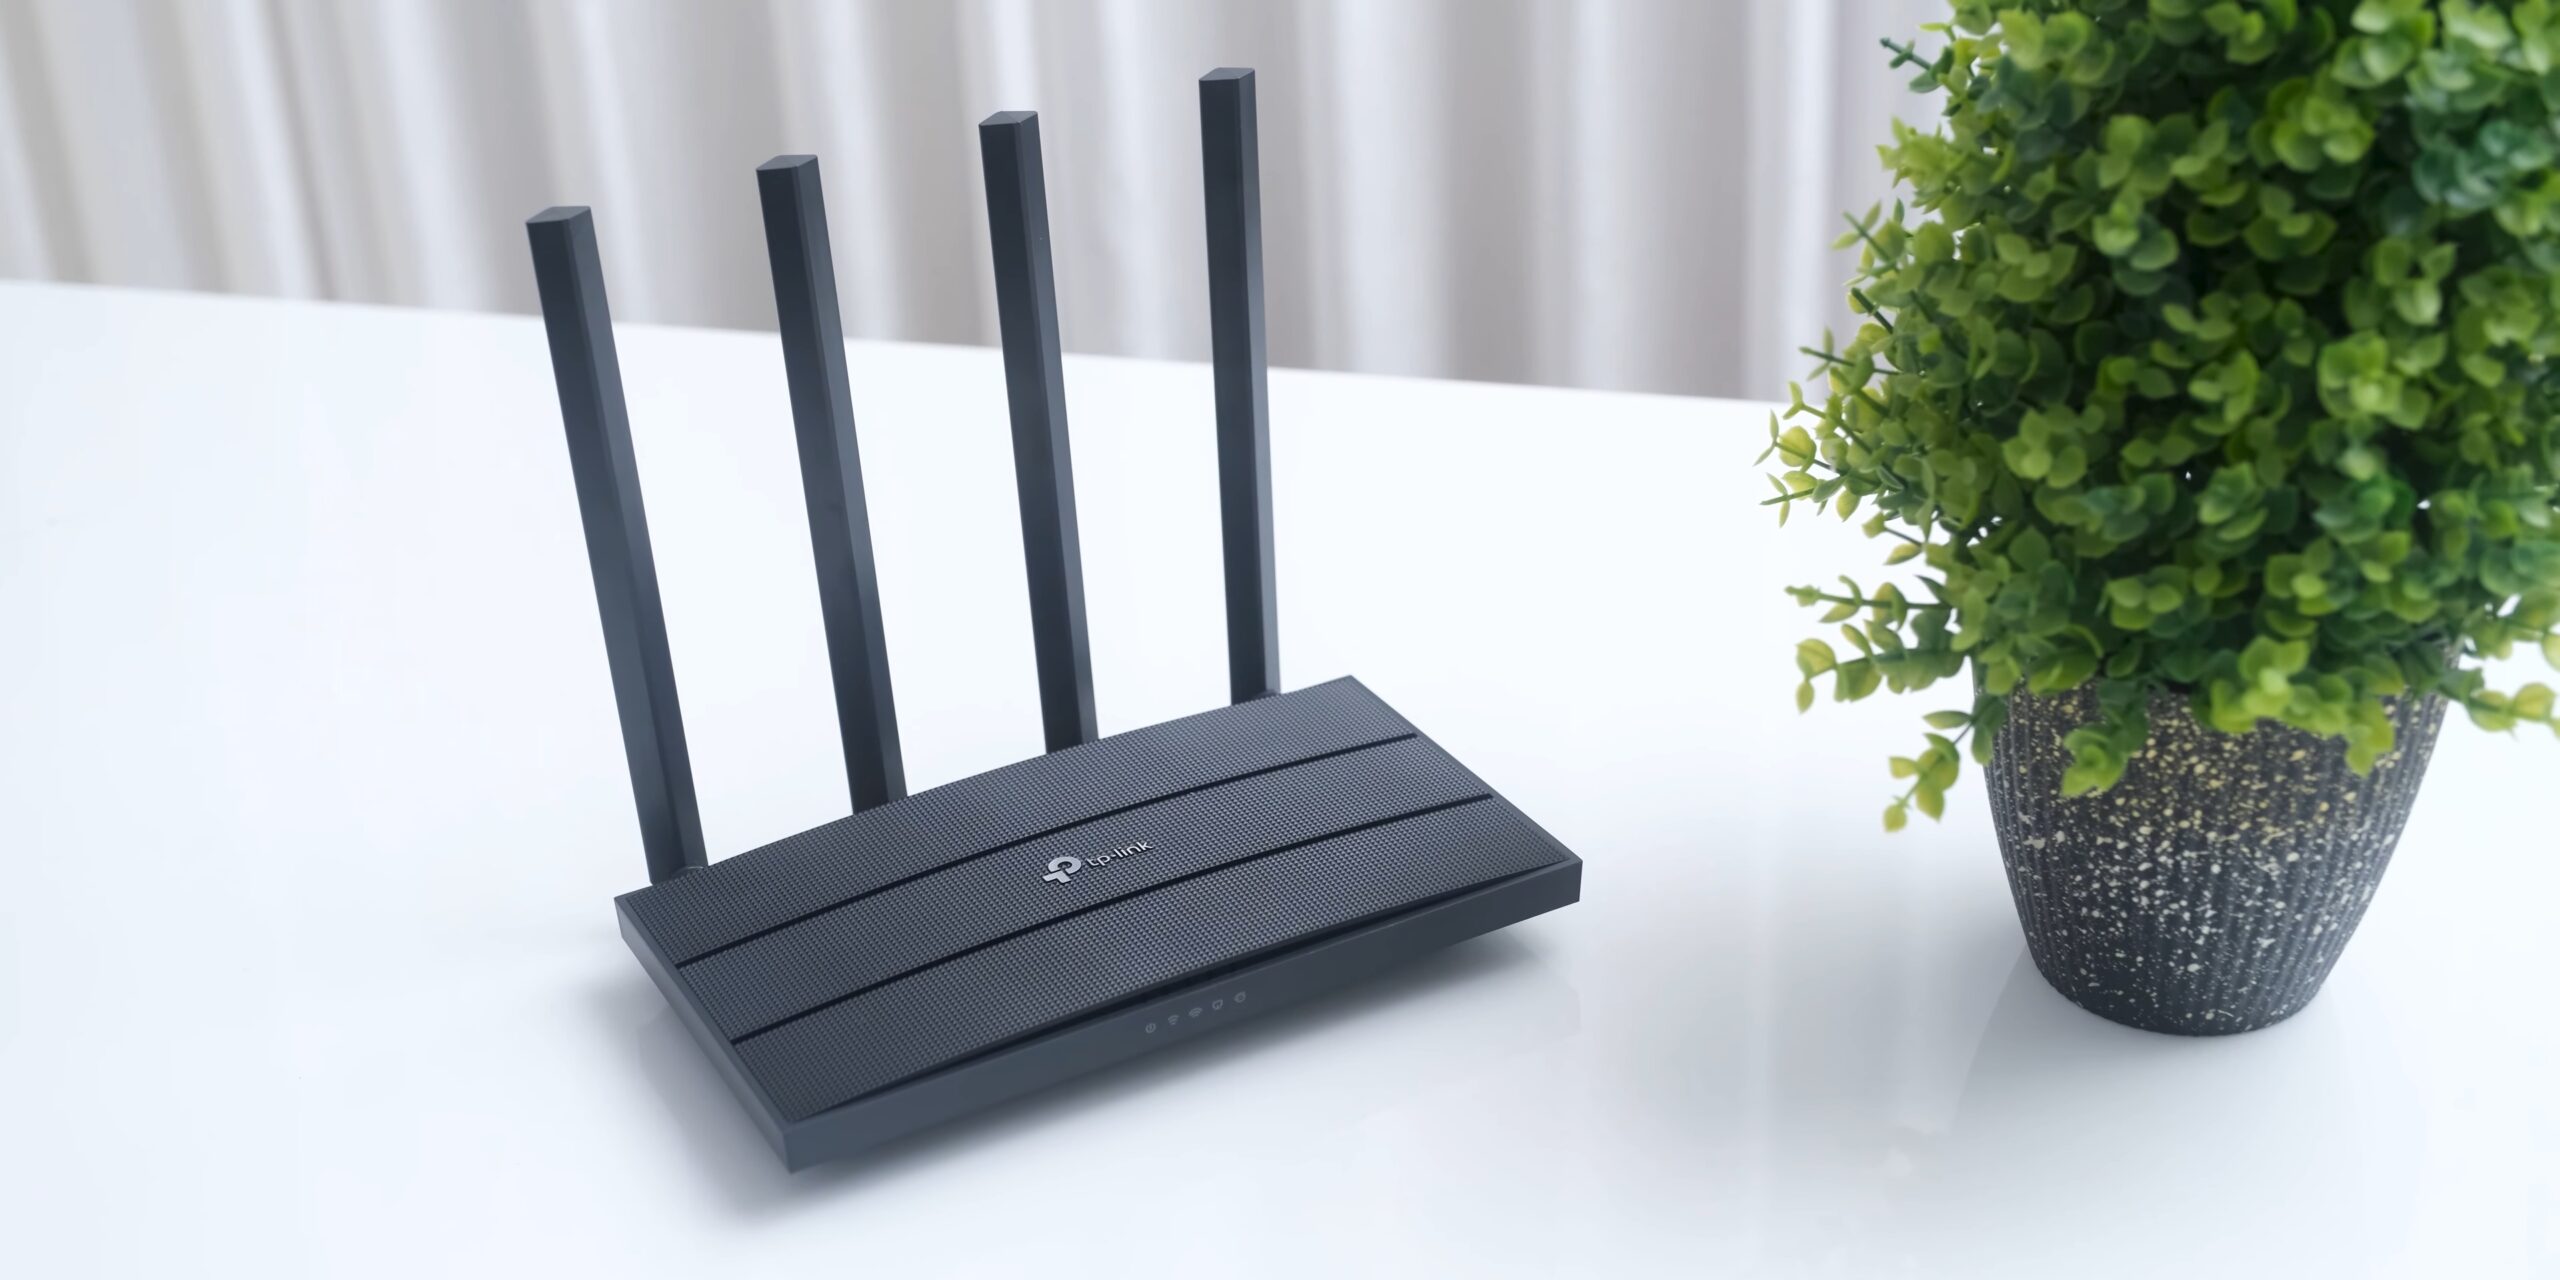 skuffe Manifest fodspor TP-Link Archer C6 / A6 AC1200 Review: All the router you need? –  TechReflex.net